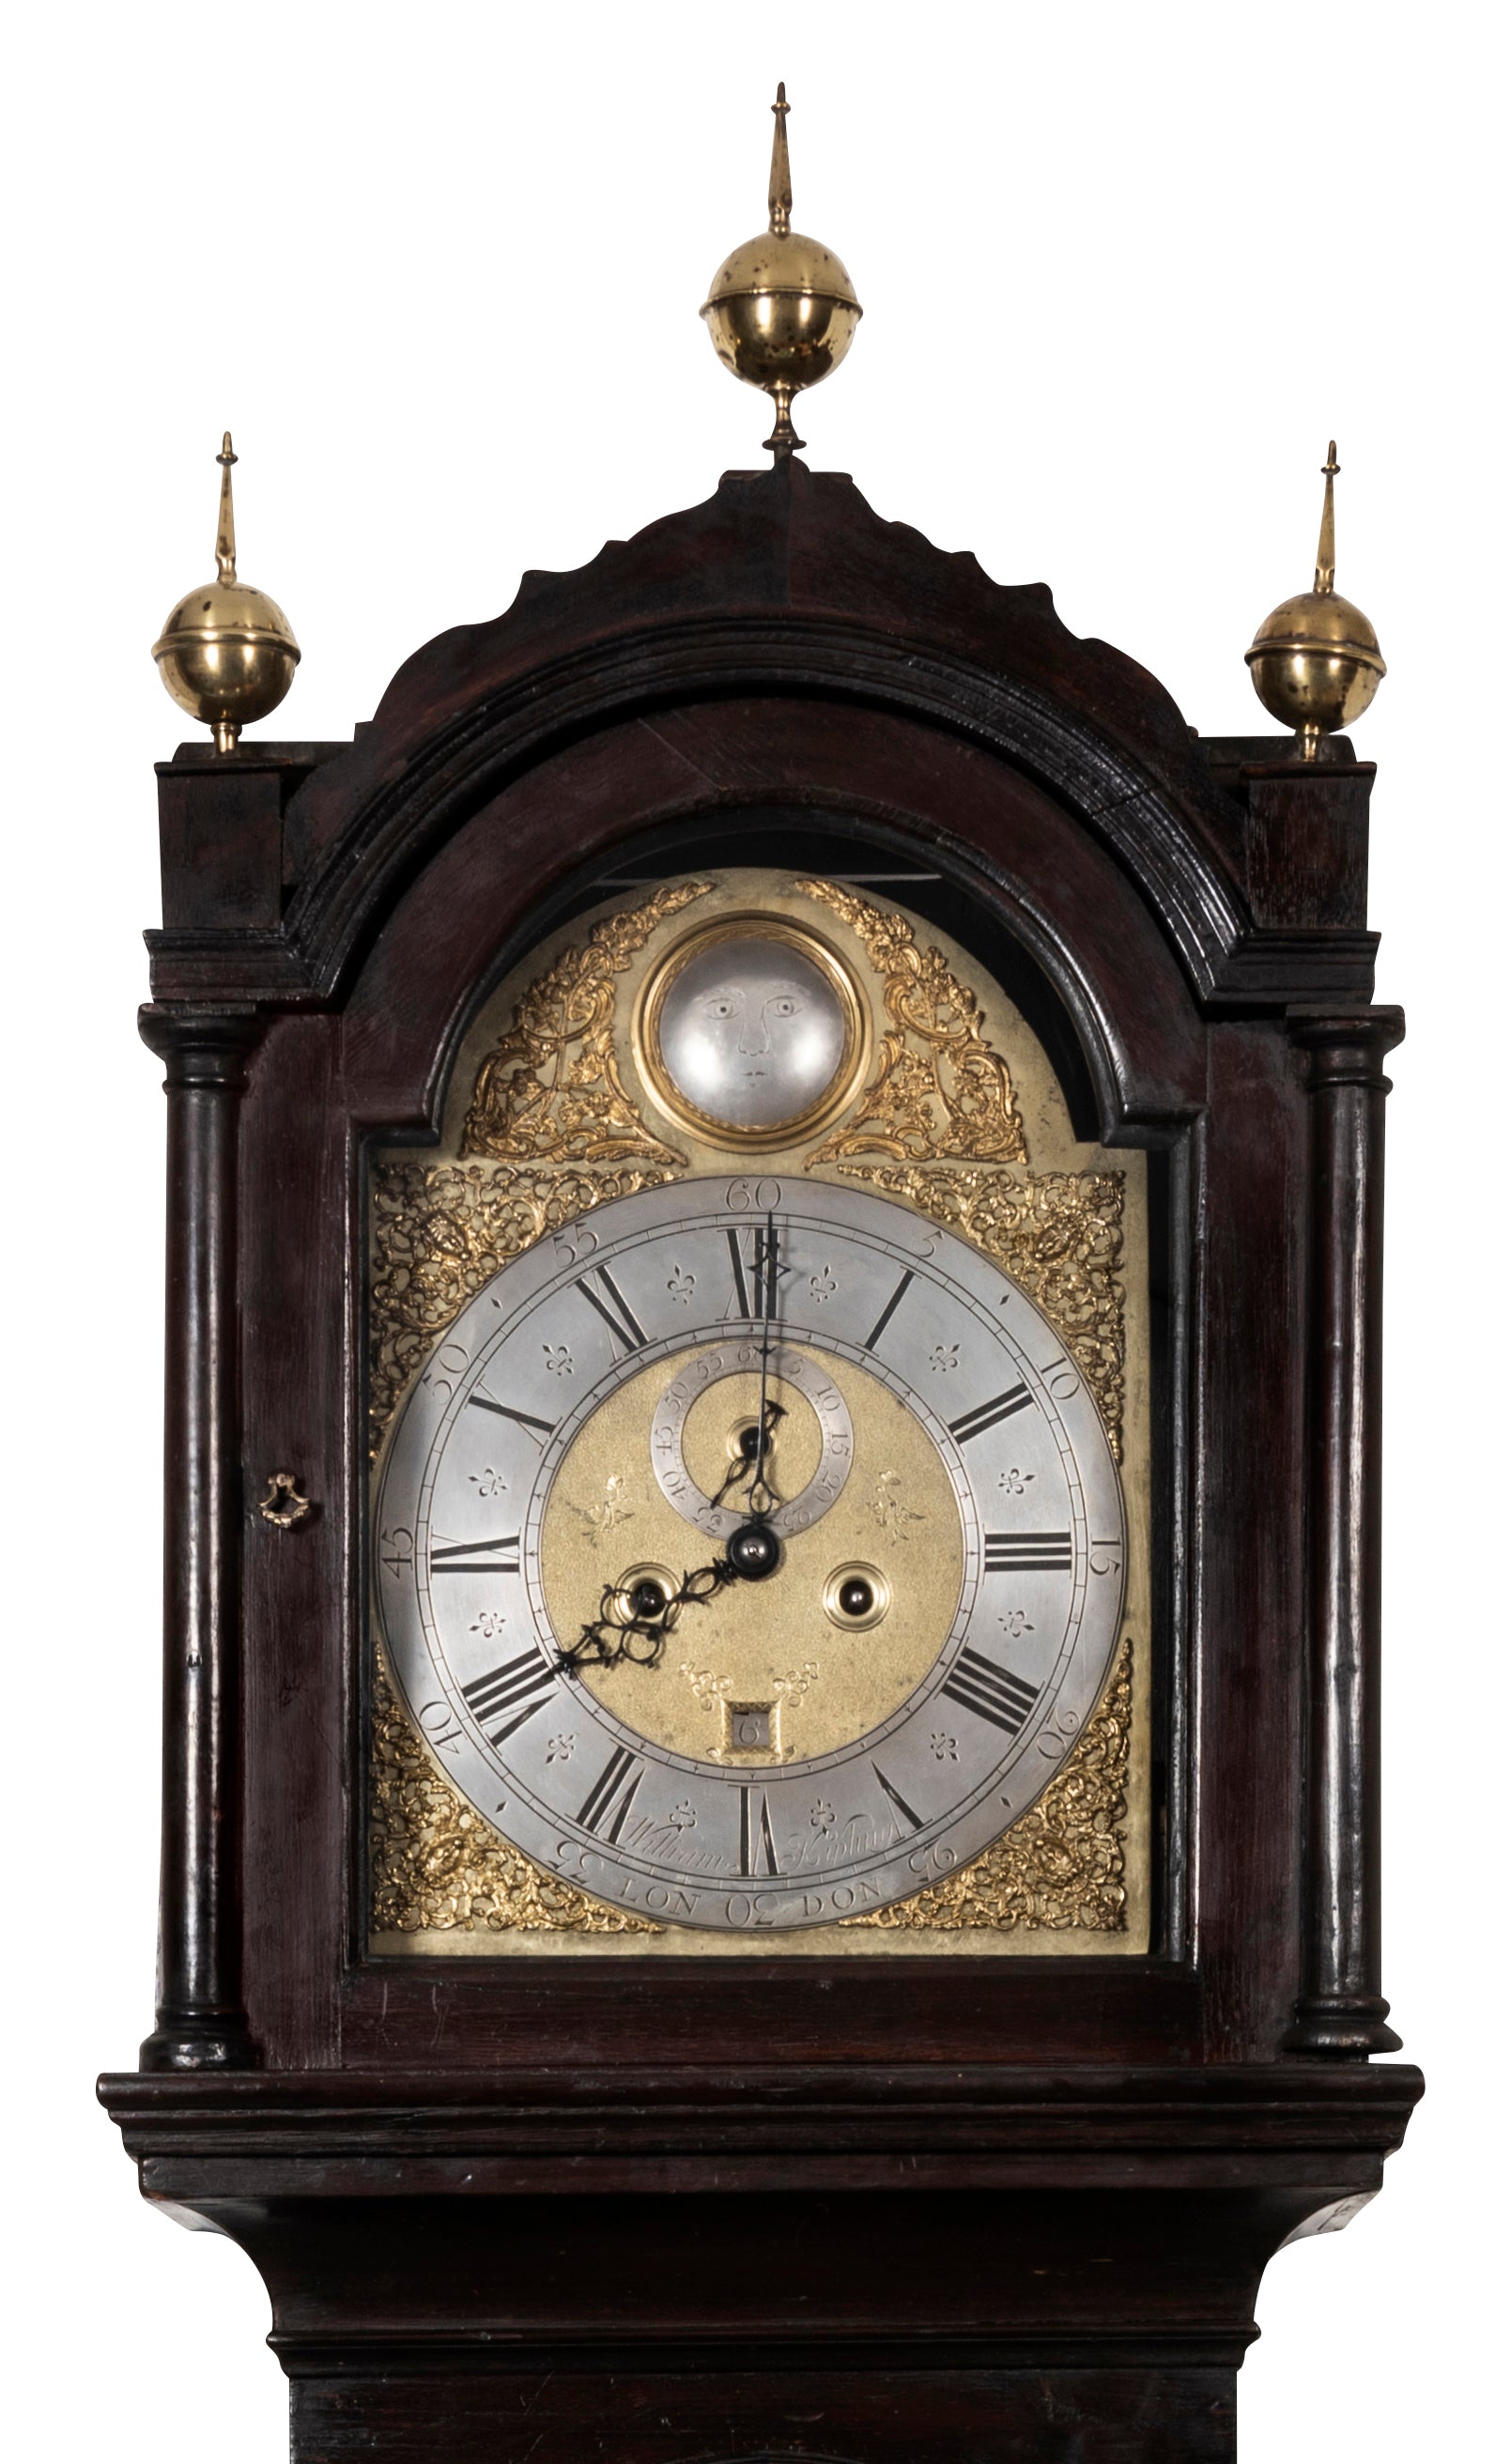 A Very Important Late Stuart Period - Early George I Period Long Case Clock